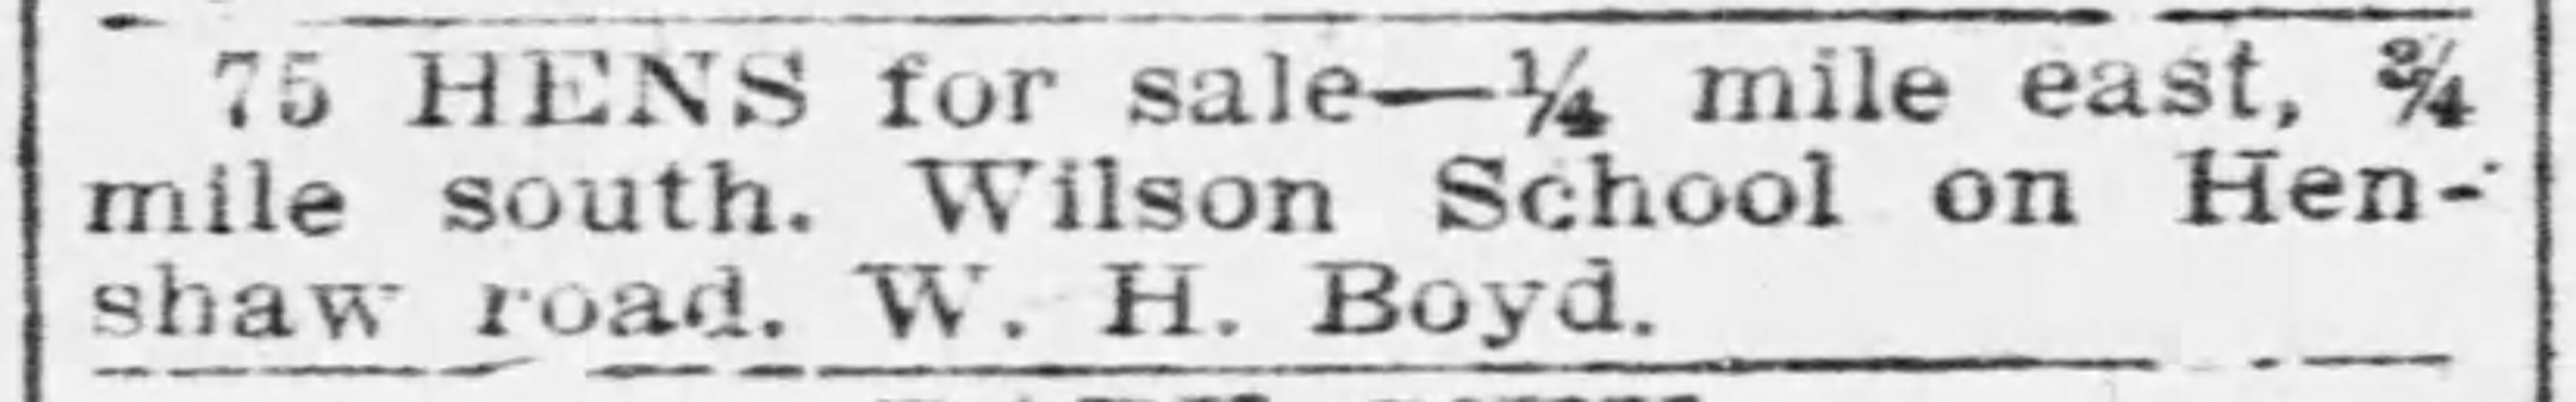 Ad for 75 hens sold by W. H. Boyd